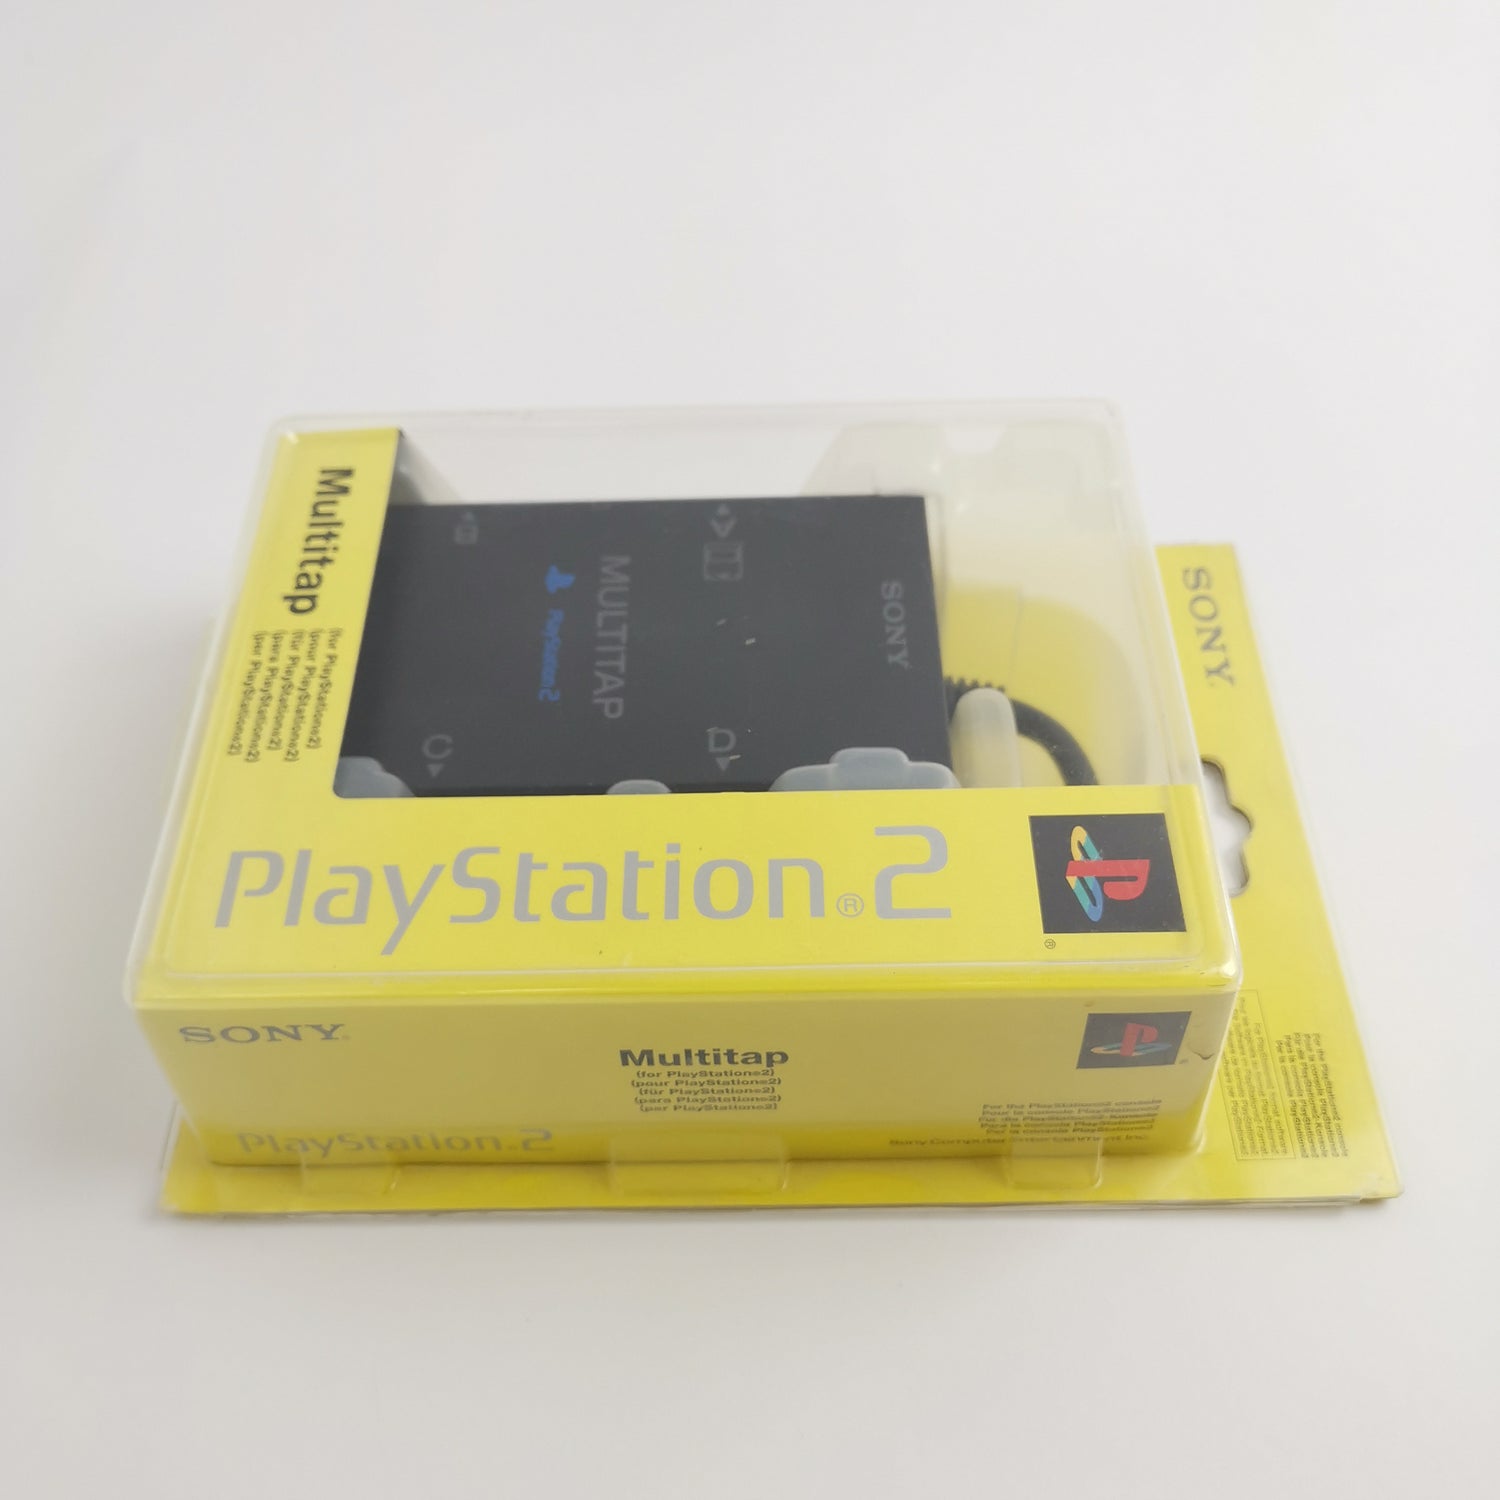 Sony Playstation 2 Accessories: Multitap Controller Adapter | PS1 PSX - OVP PAL